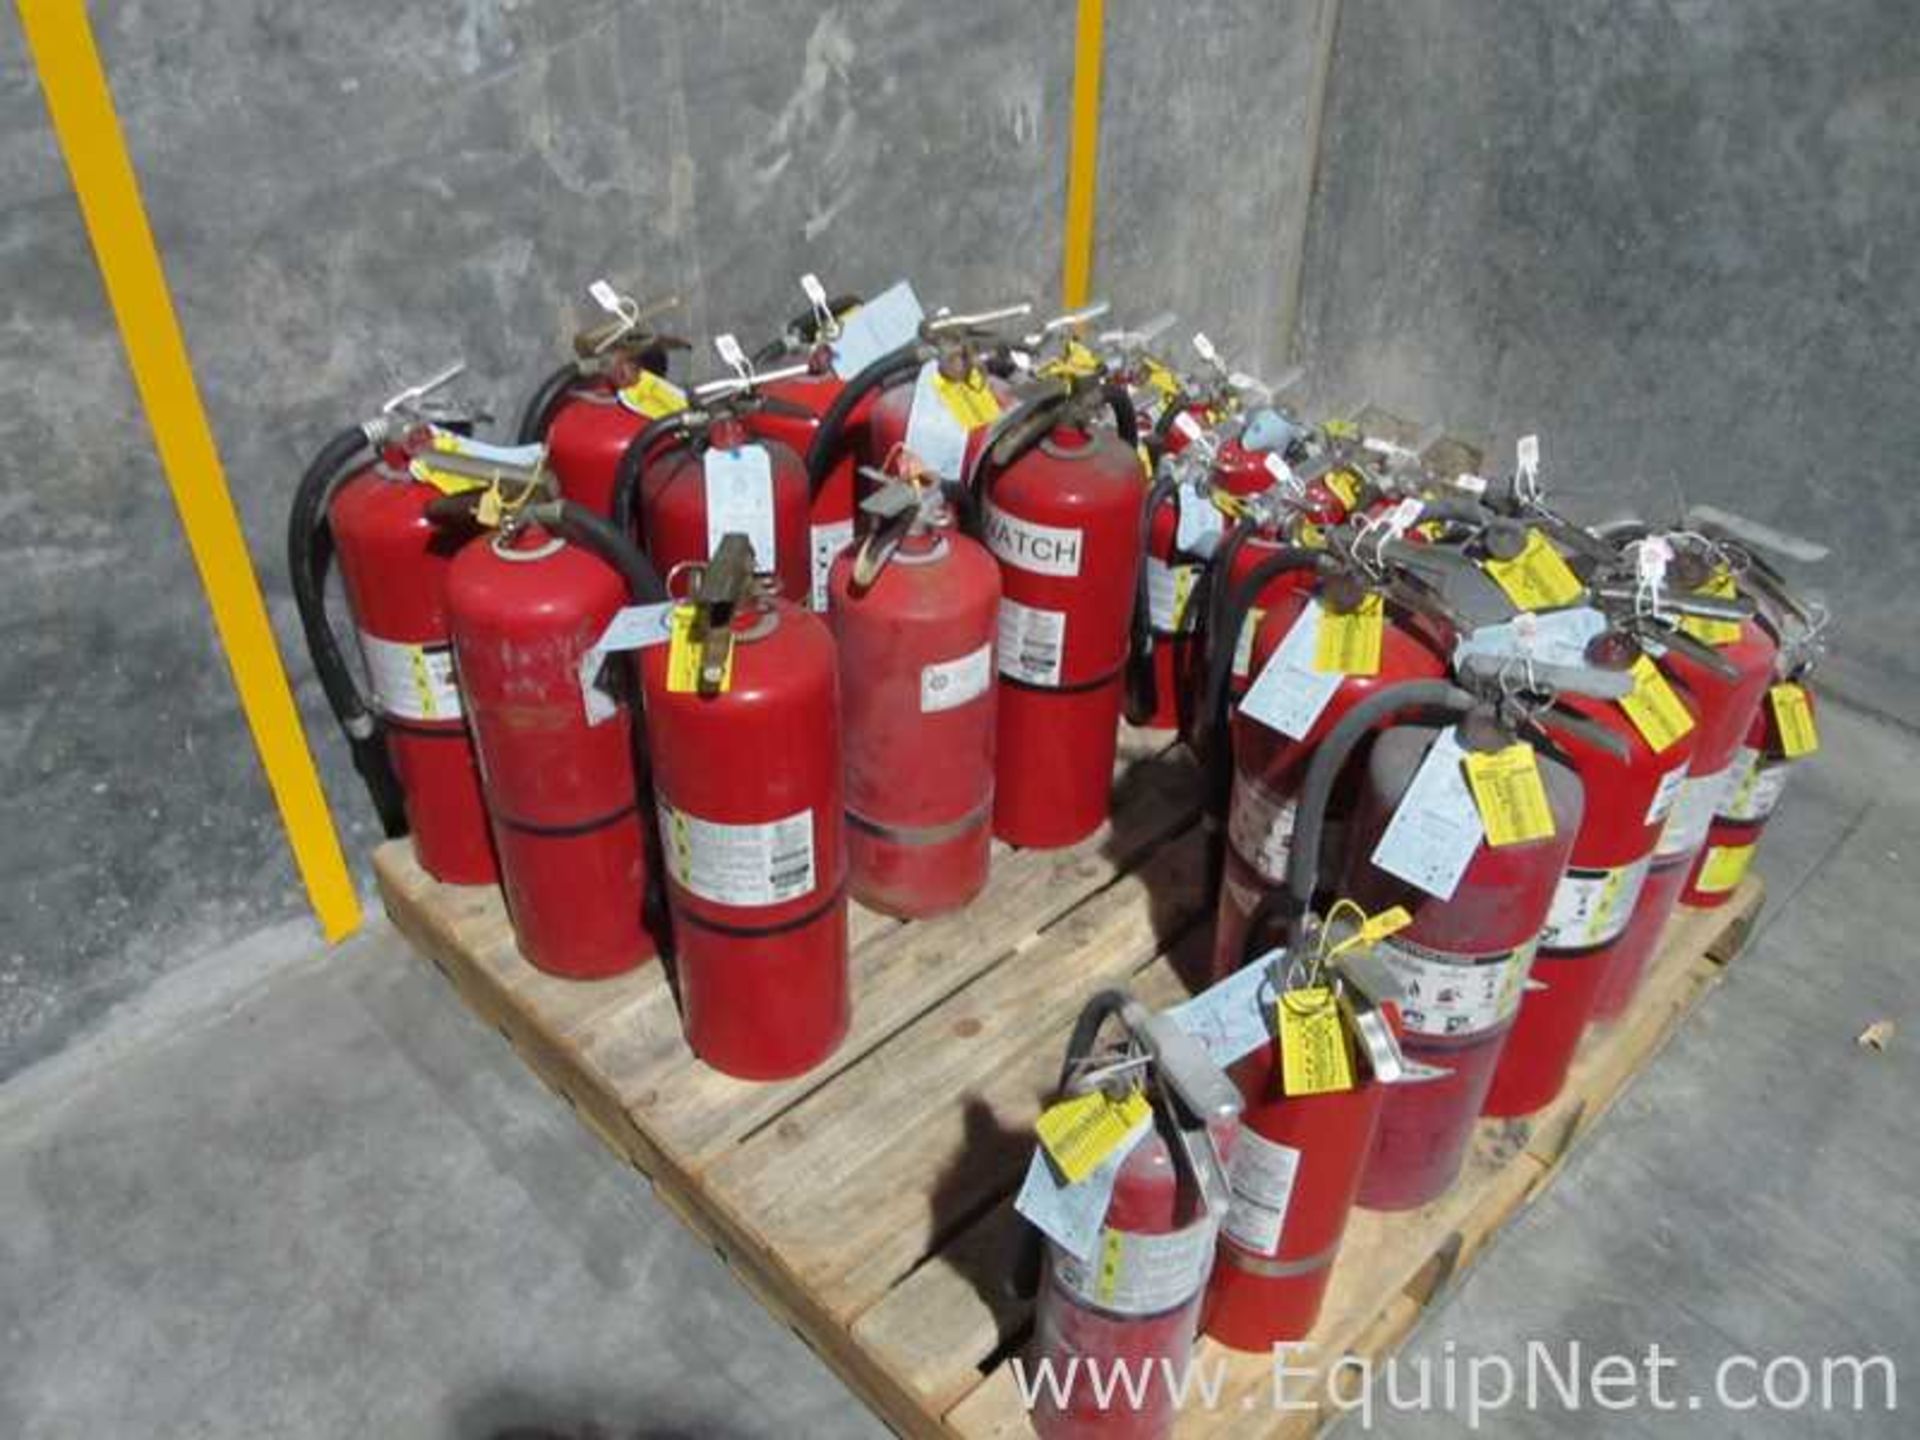 Lot of 32 ABC Mixed Size Fire Extinguishers - Image 2 of 2